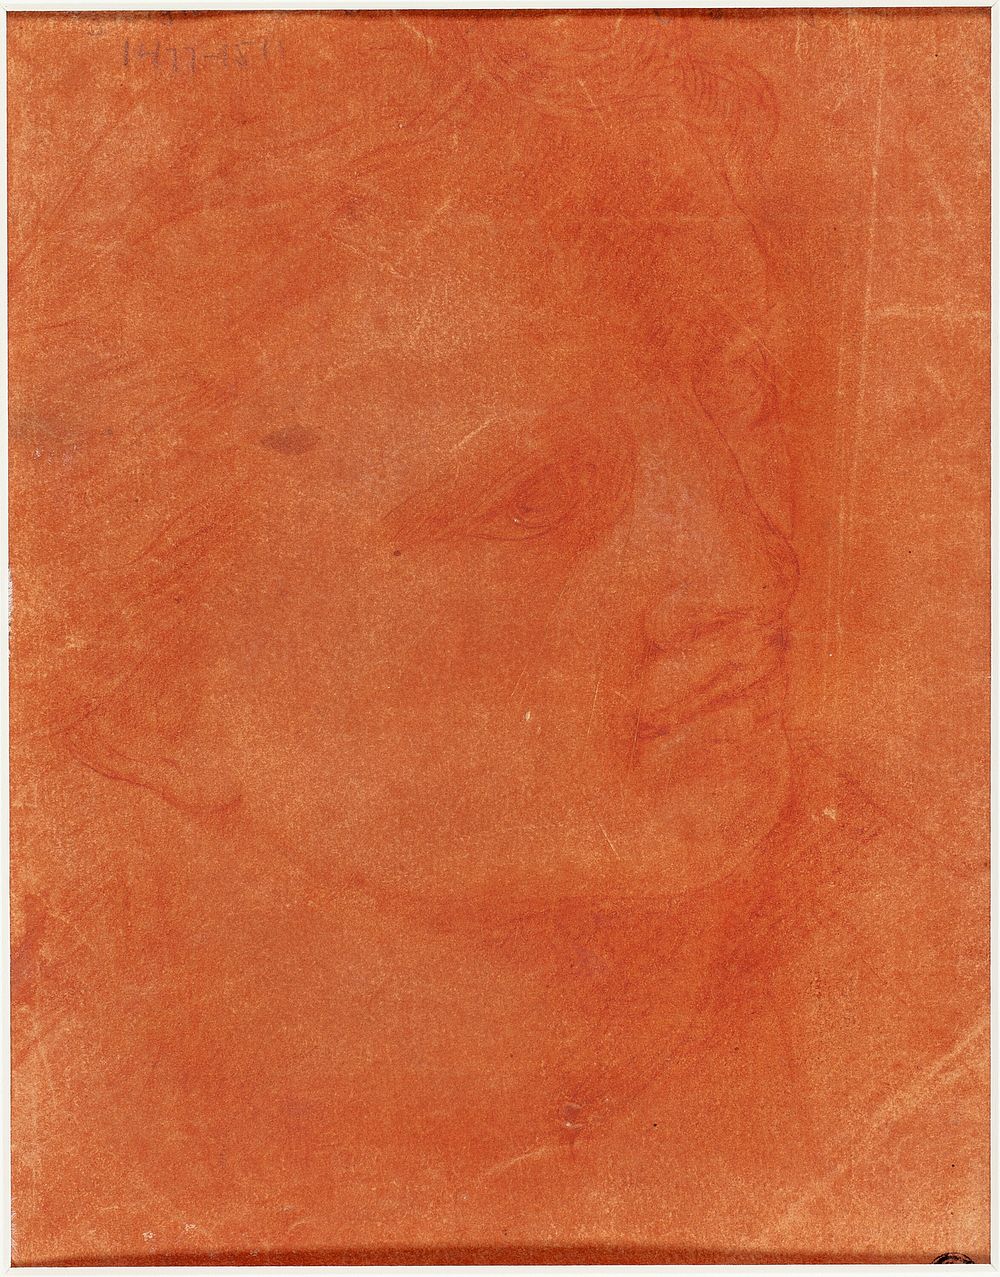 Head in Three-Quarter Profile (recto); Standing Young Man Pointing Left and Sketches of Feet, Arm (verso) by Giorgione